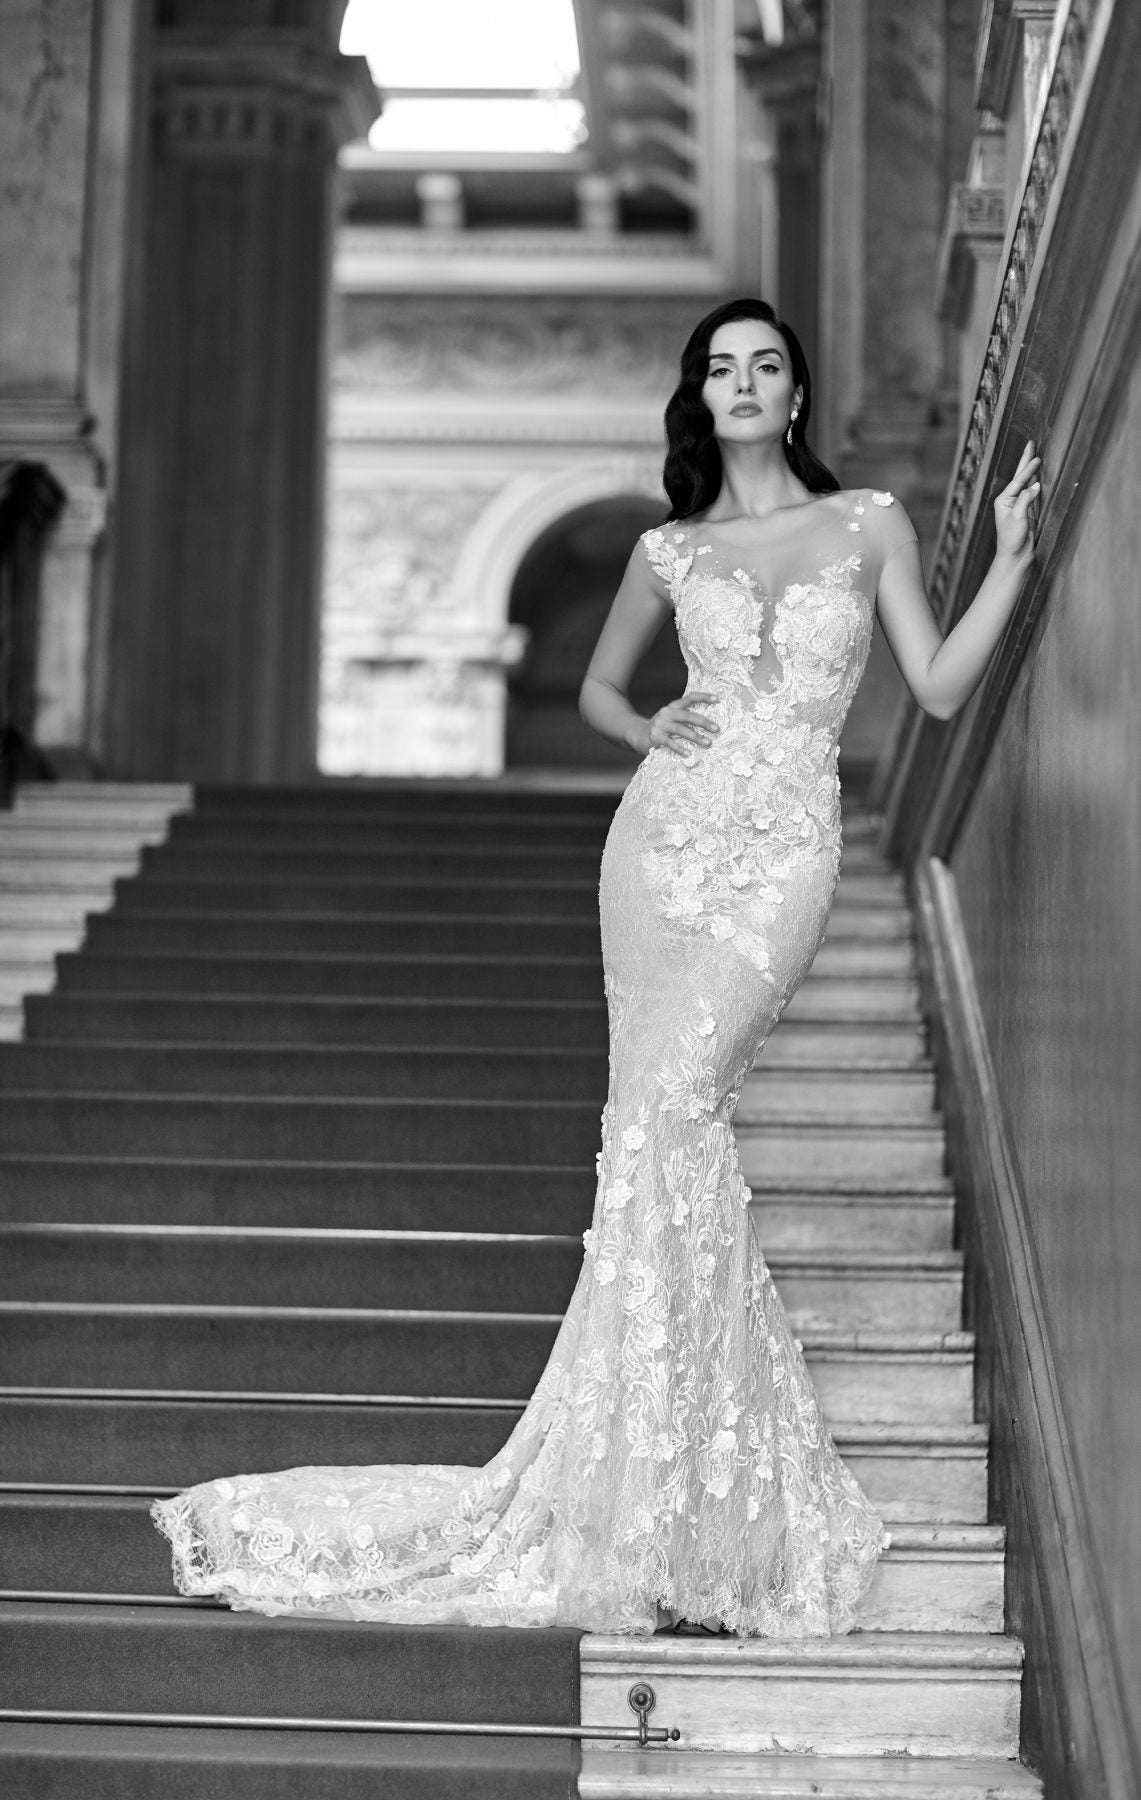 maison-signore-modern-fit-and-flare-wedding-dress-33714379-1141x1800.jpg